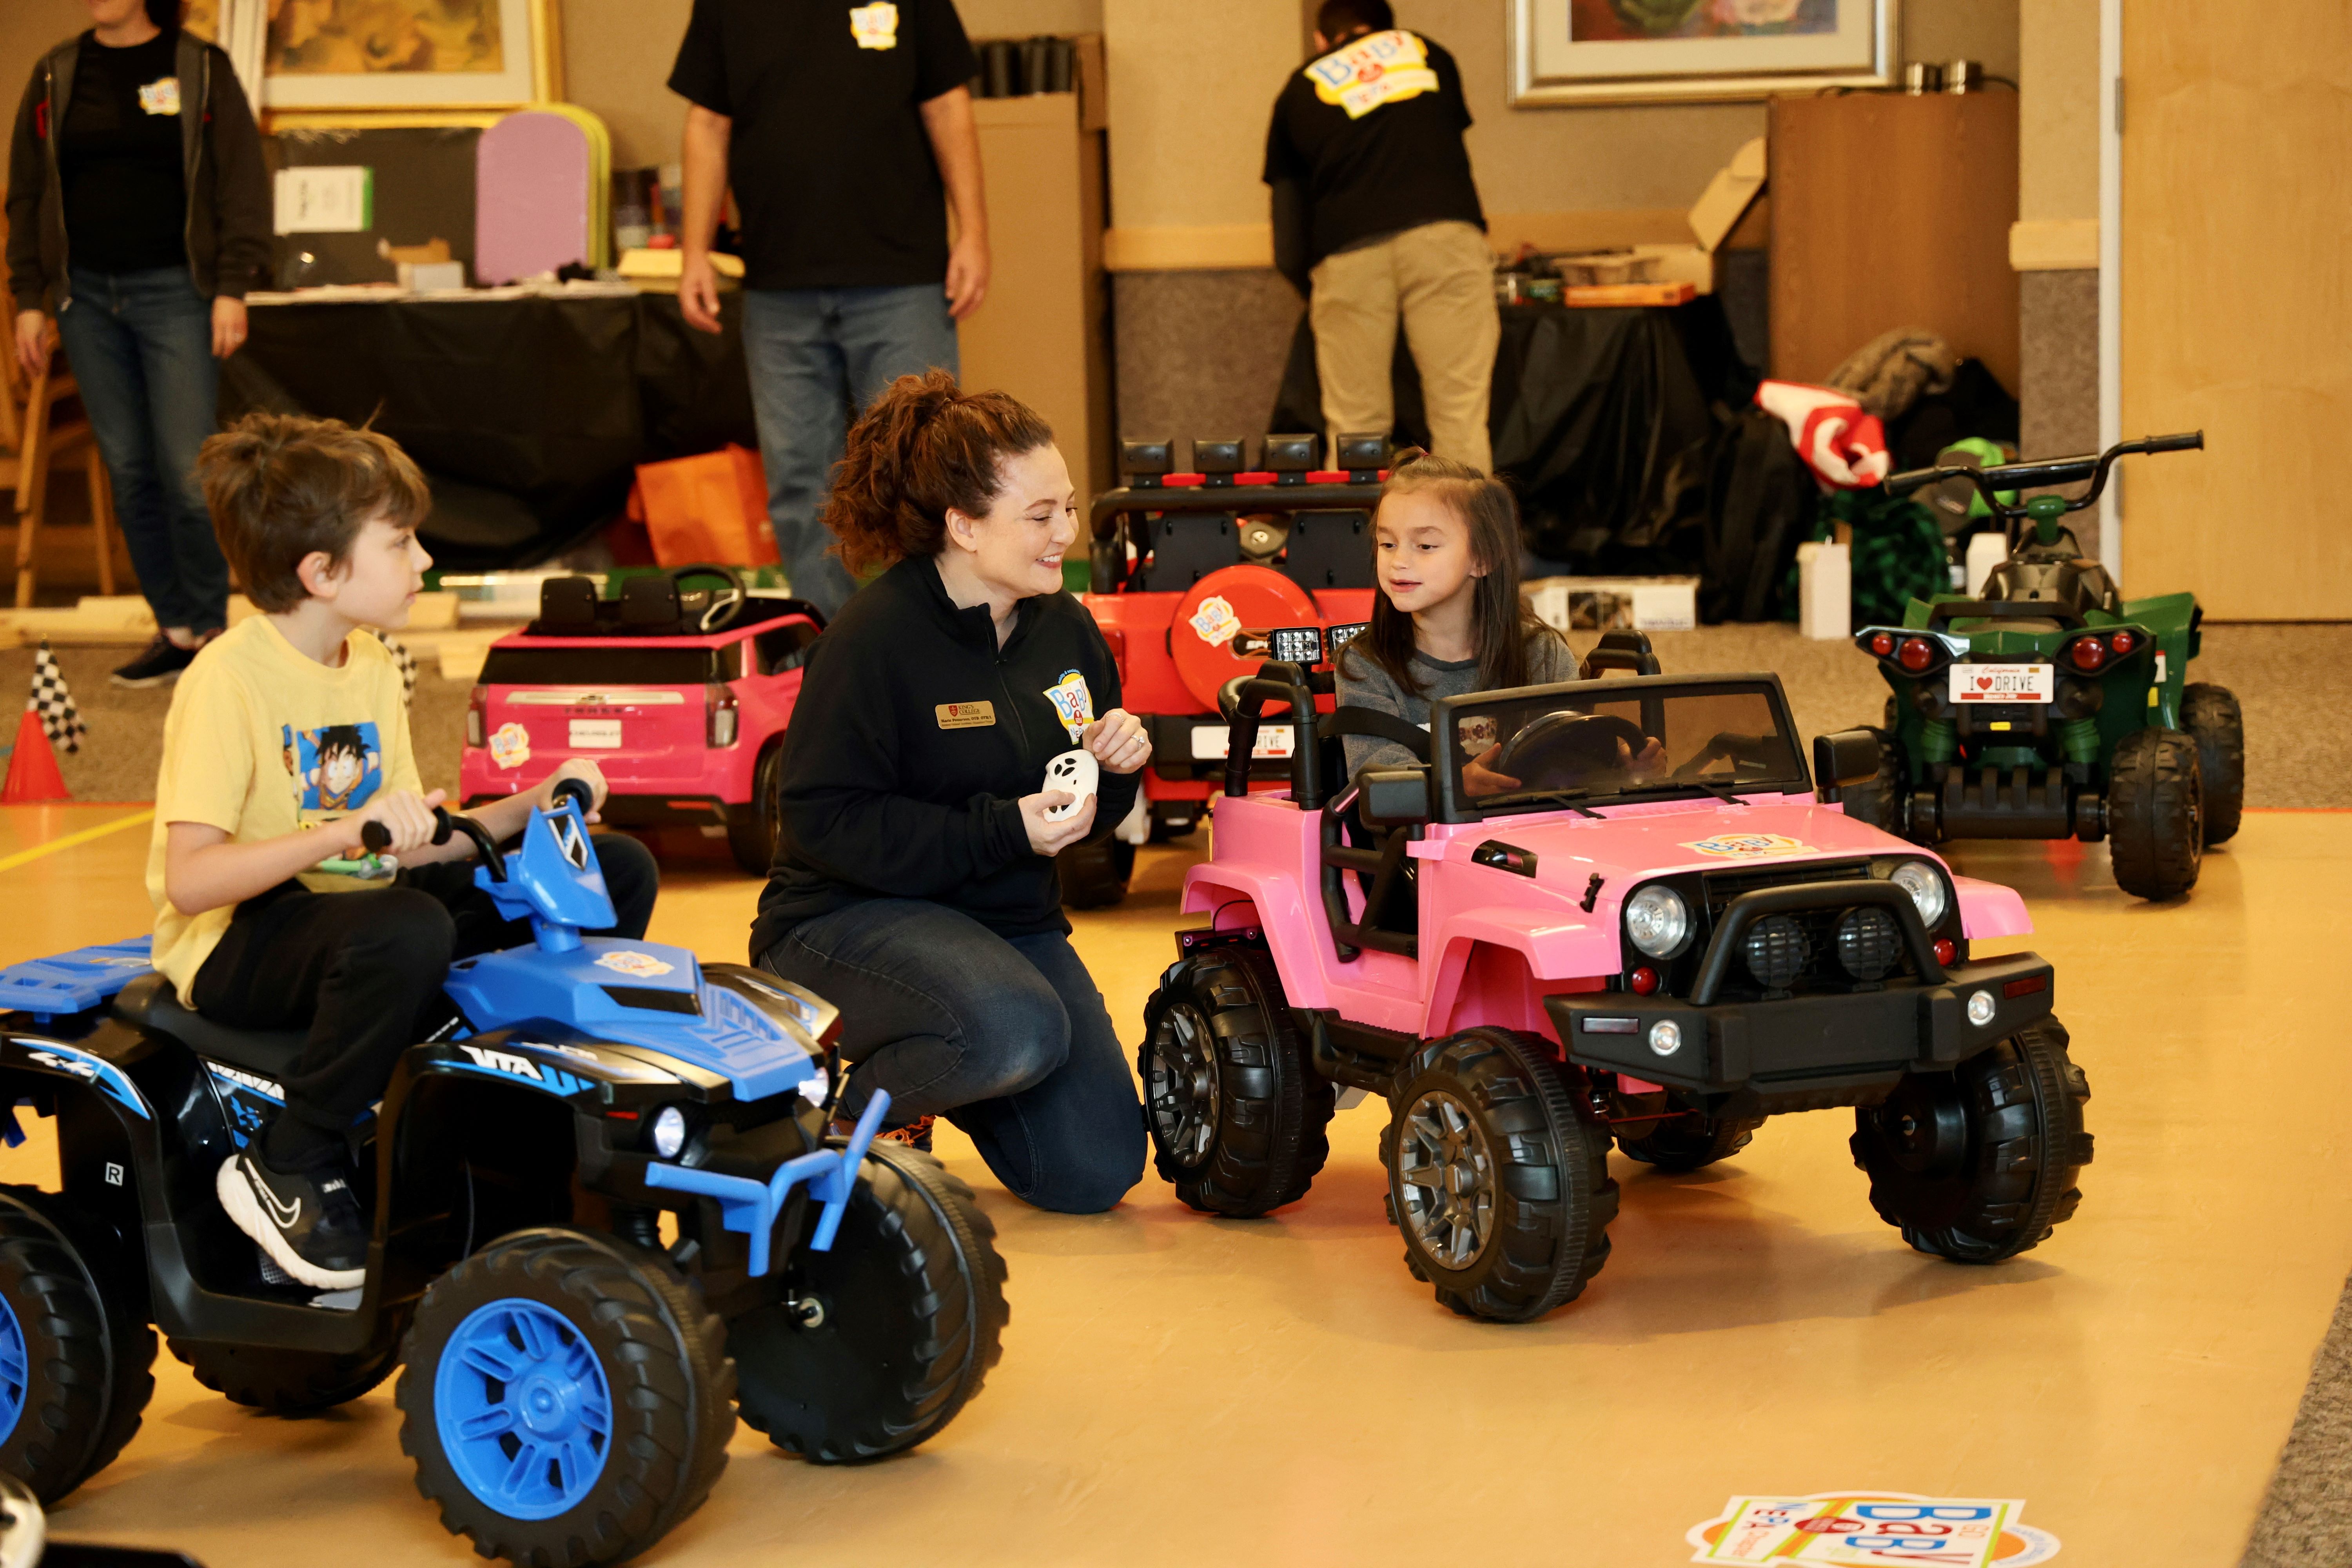 Dr.-Patterson-checks-in-on-Stella-Sutton-driving-custom-vehicle-in-playgroup-with-other-children.jpg